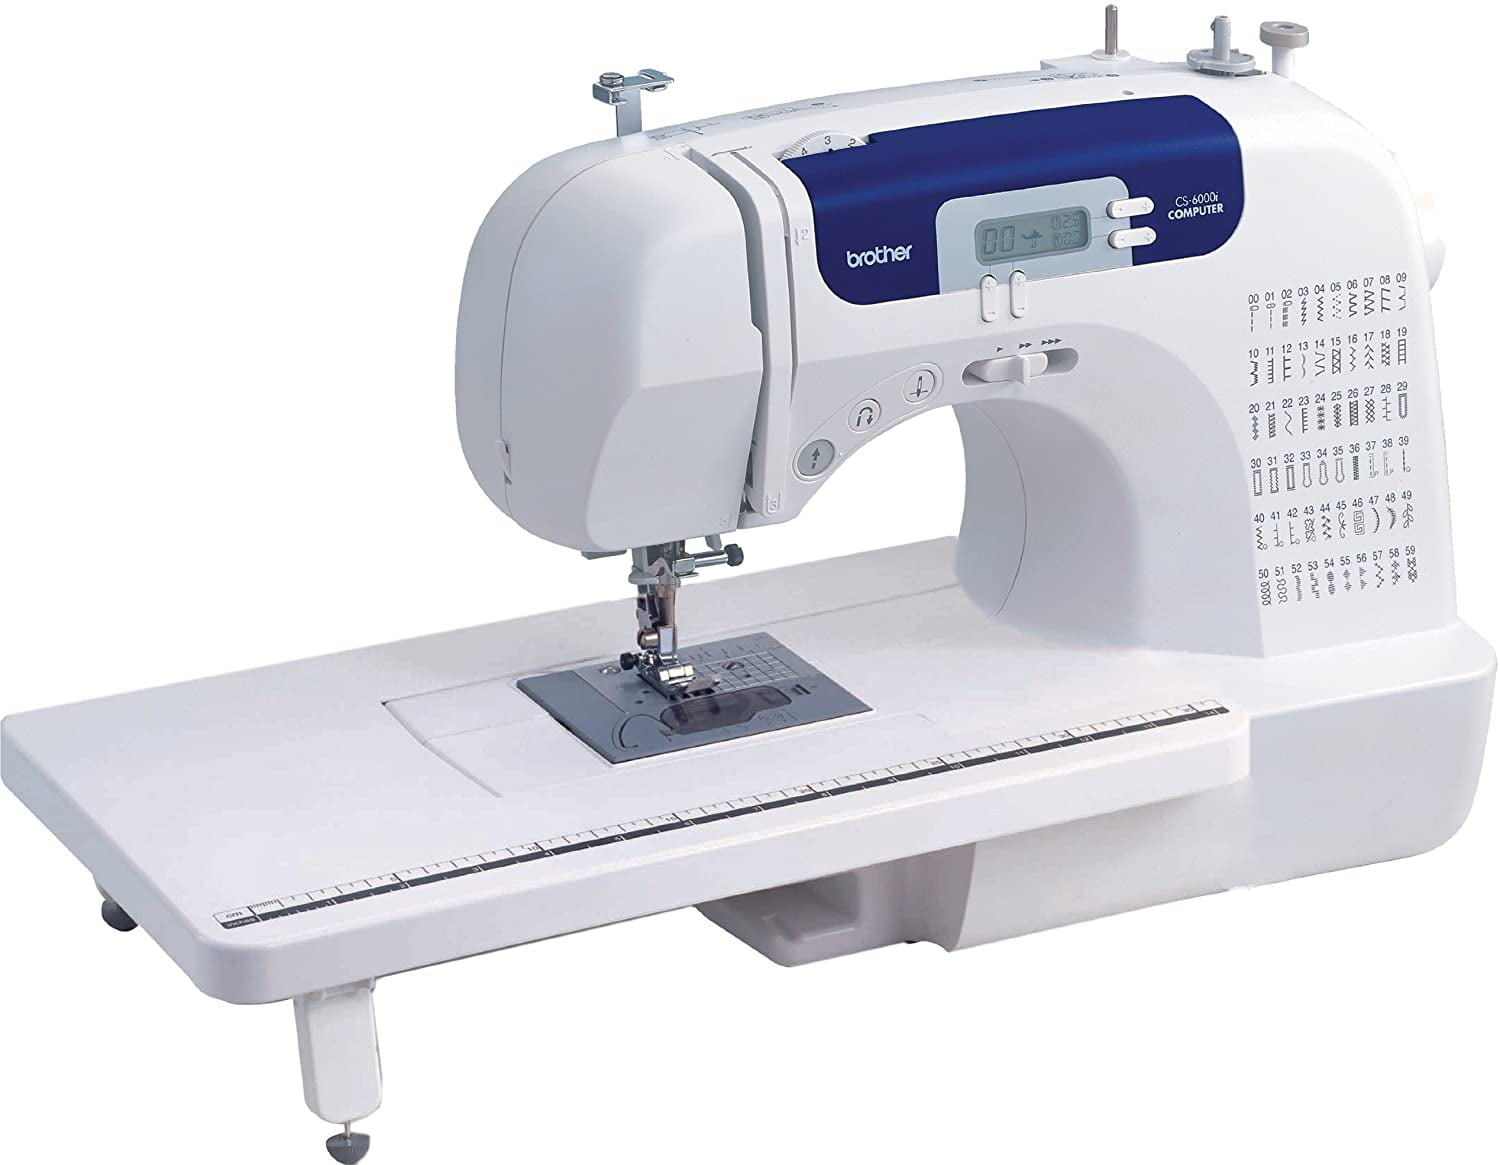 Help with free motion on Brother cs6000i - Quiltingboard Forums